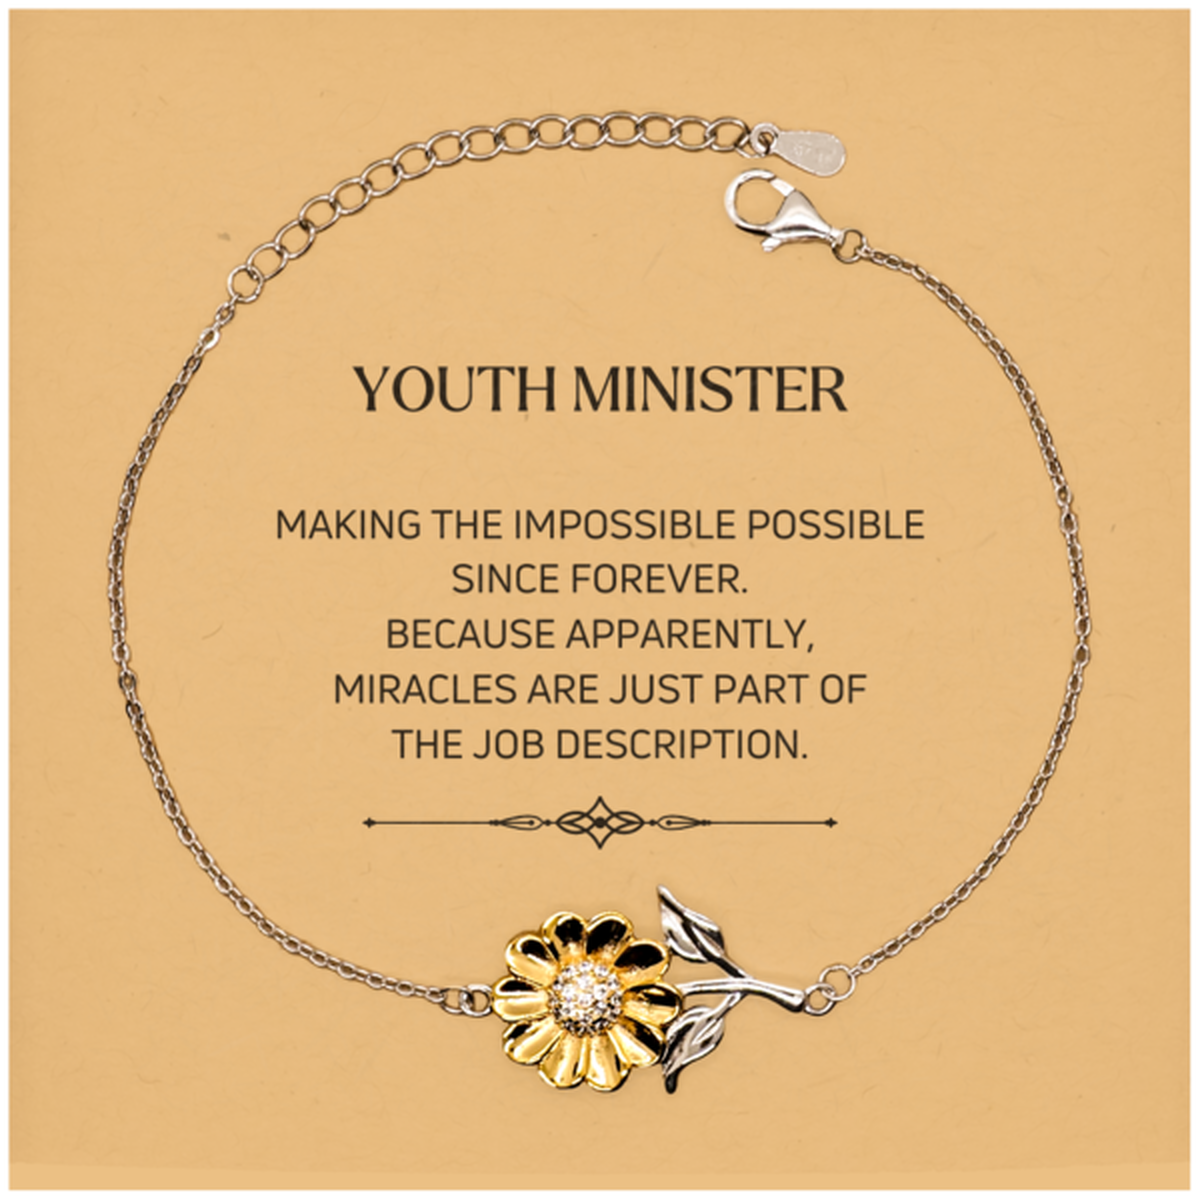 Funny Youth Minister Gifts, Miracles are just part of the job description, Inspirational Birthday Christmas Sunflower Bracelet For Youth Minister, Men, Women, Coworkers, Friends, Boss